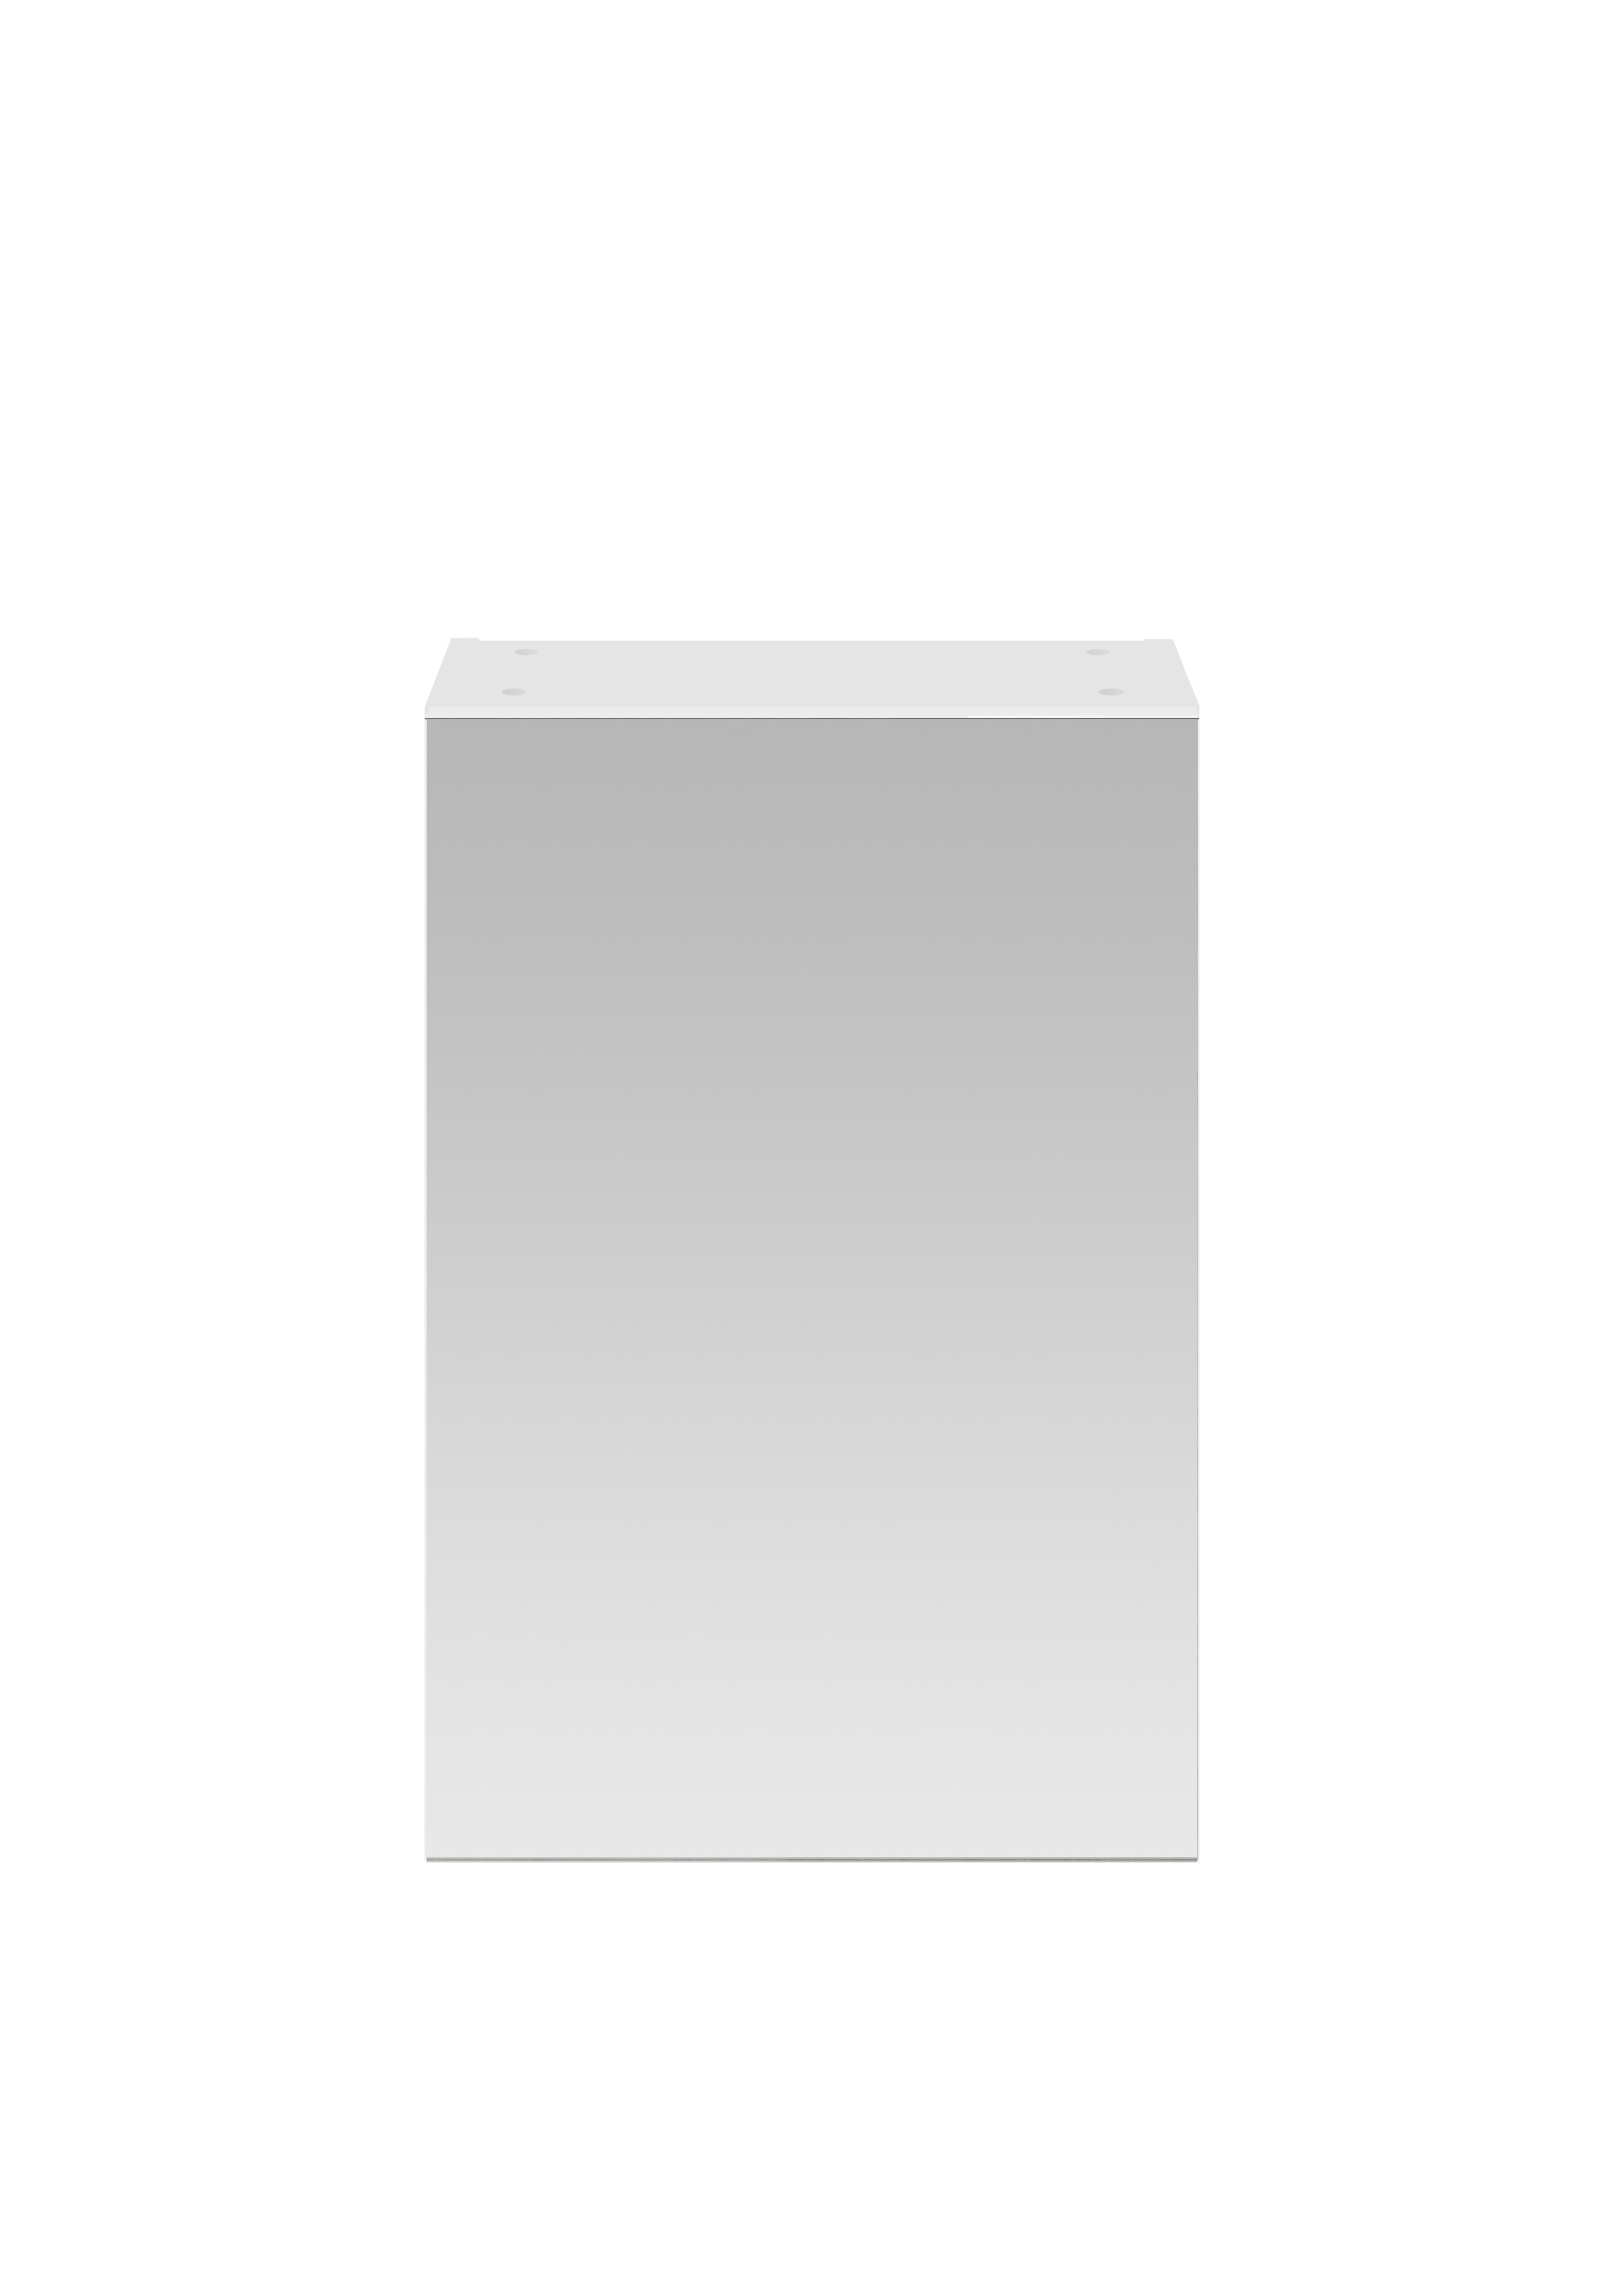 Nuie 1-Door Athena Mirrored Bathroom Cabinet 715mm Height x 450mm Wide - Gloss White - OFF116 